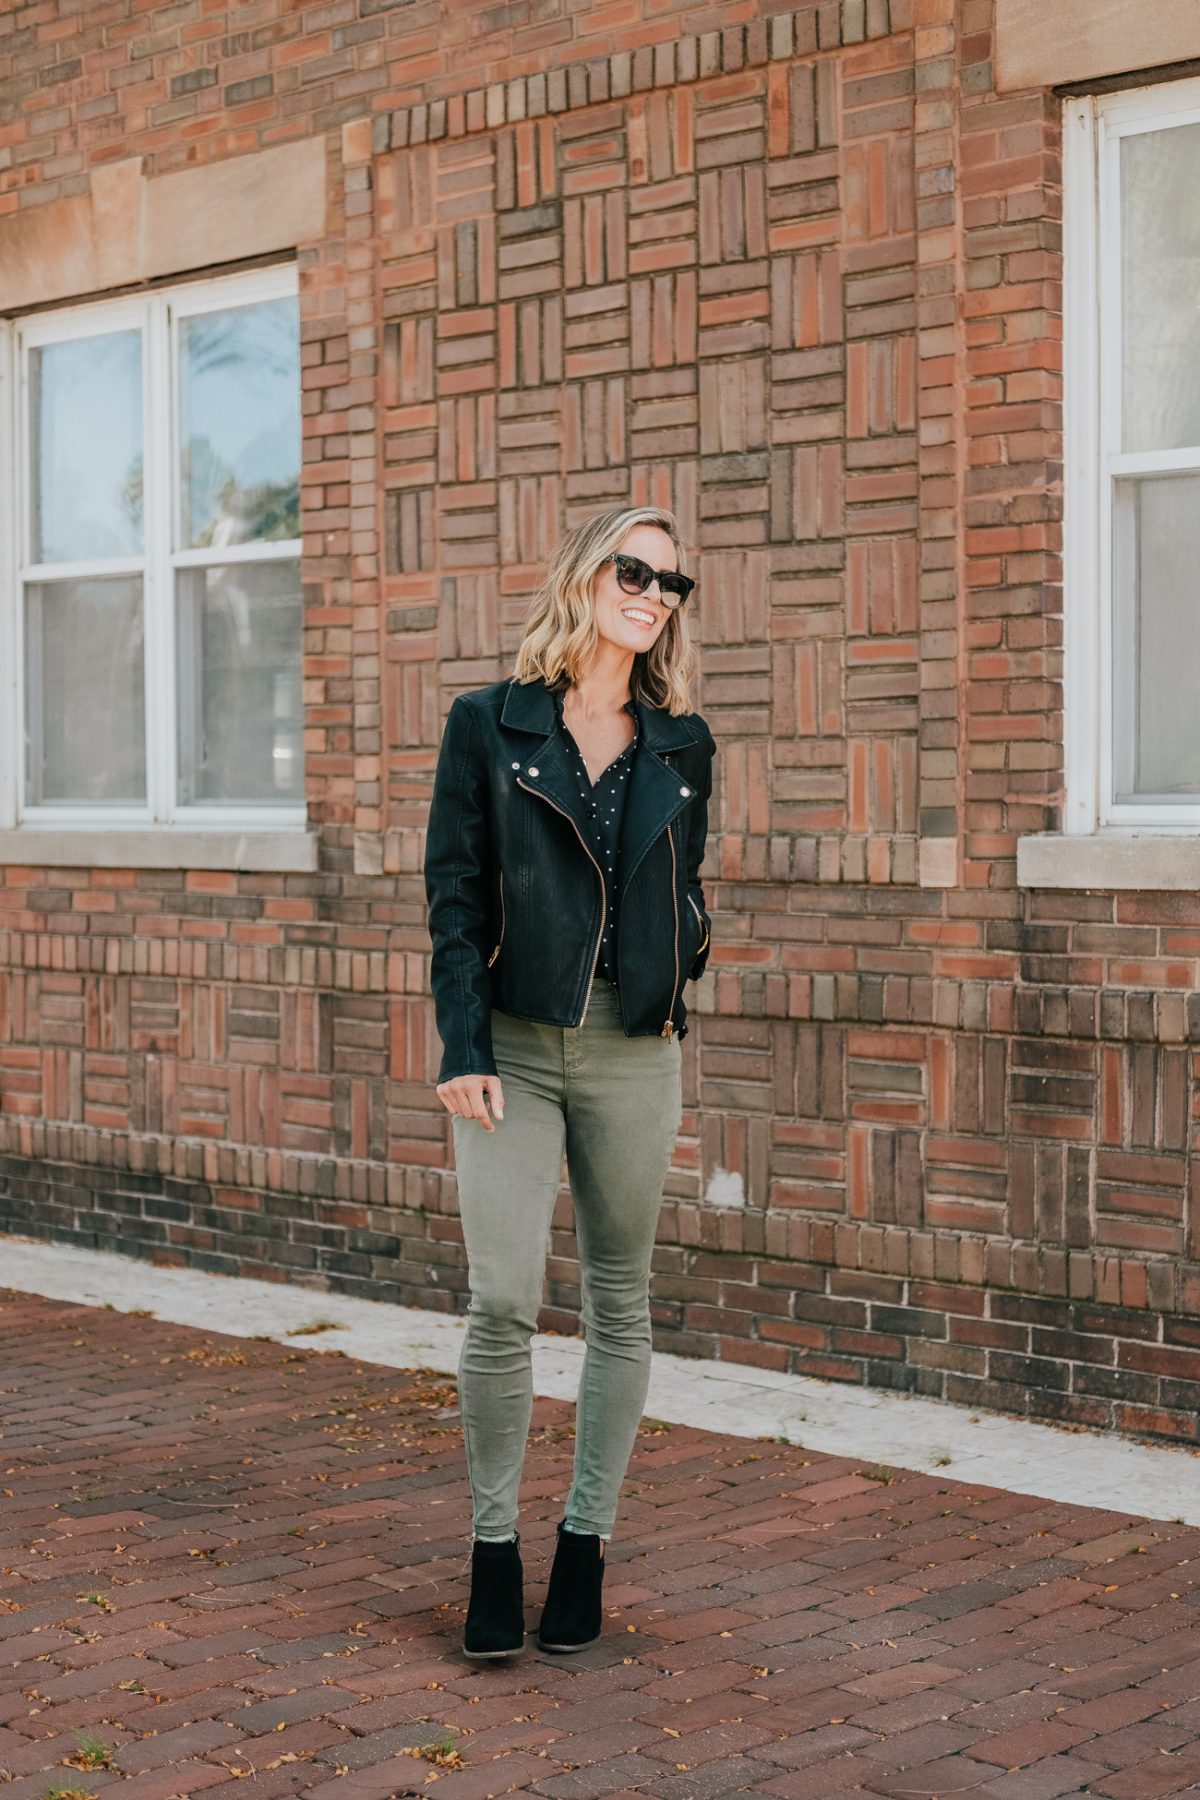 Budget Friendly Style: $25 Olive Pants - my kind of sweet